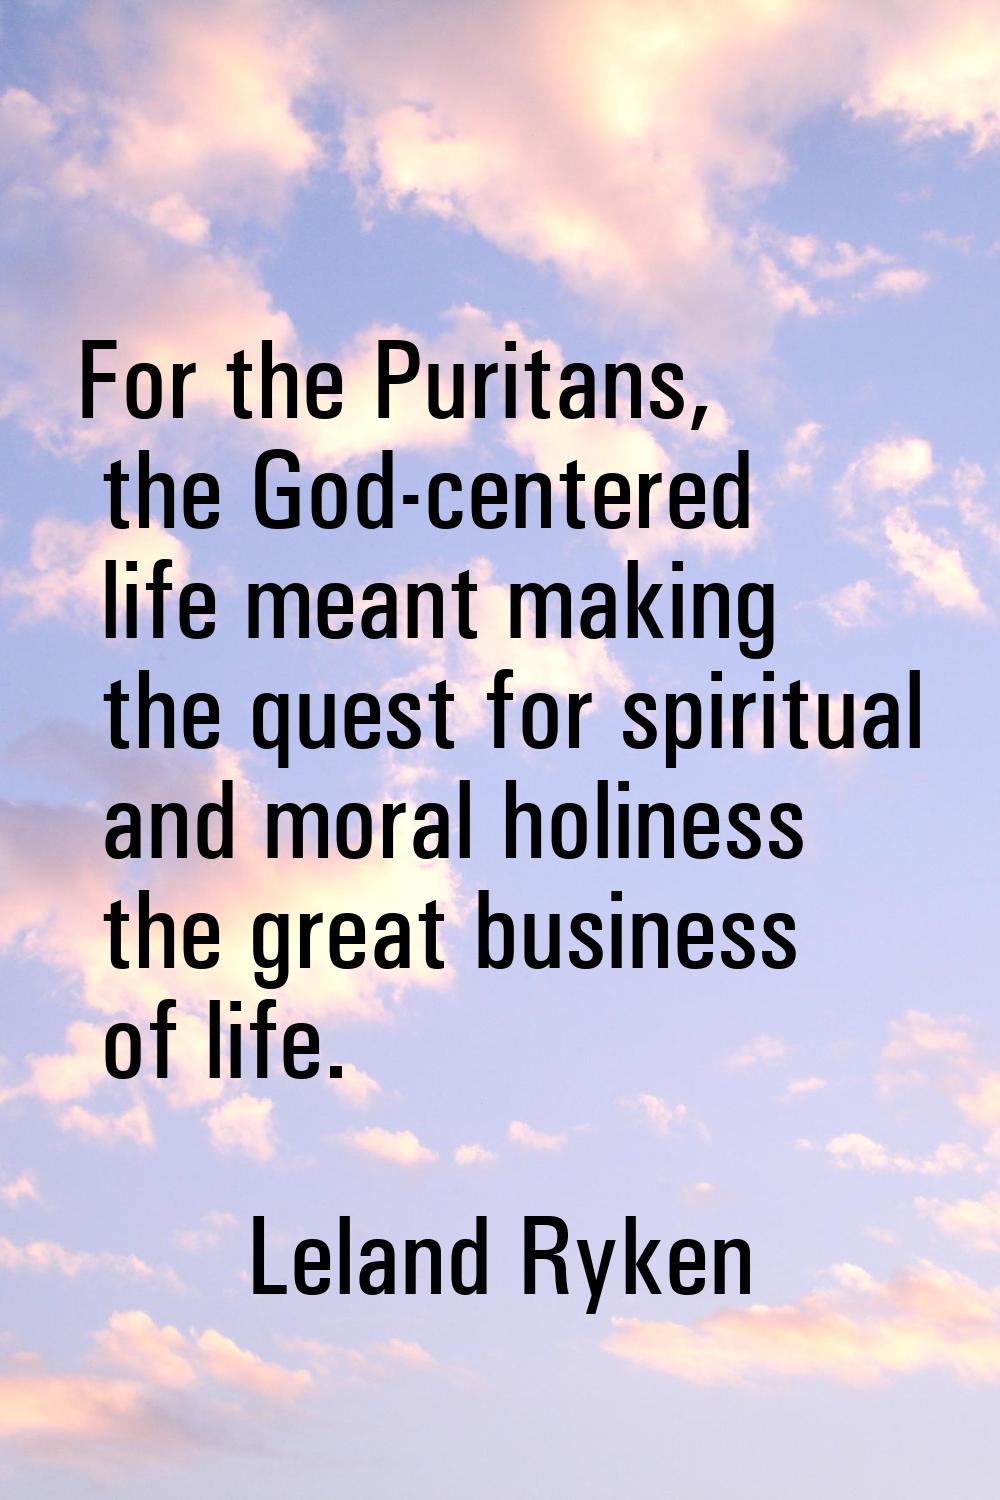 For the Puritans, the God-centered life meant making the quest for spiritual and moral holiness the